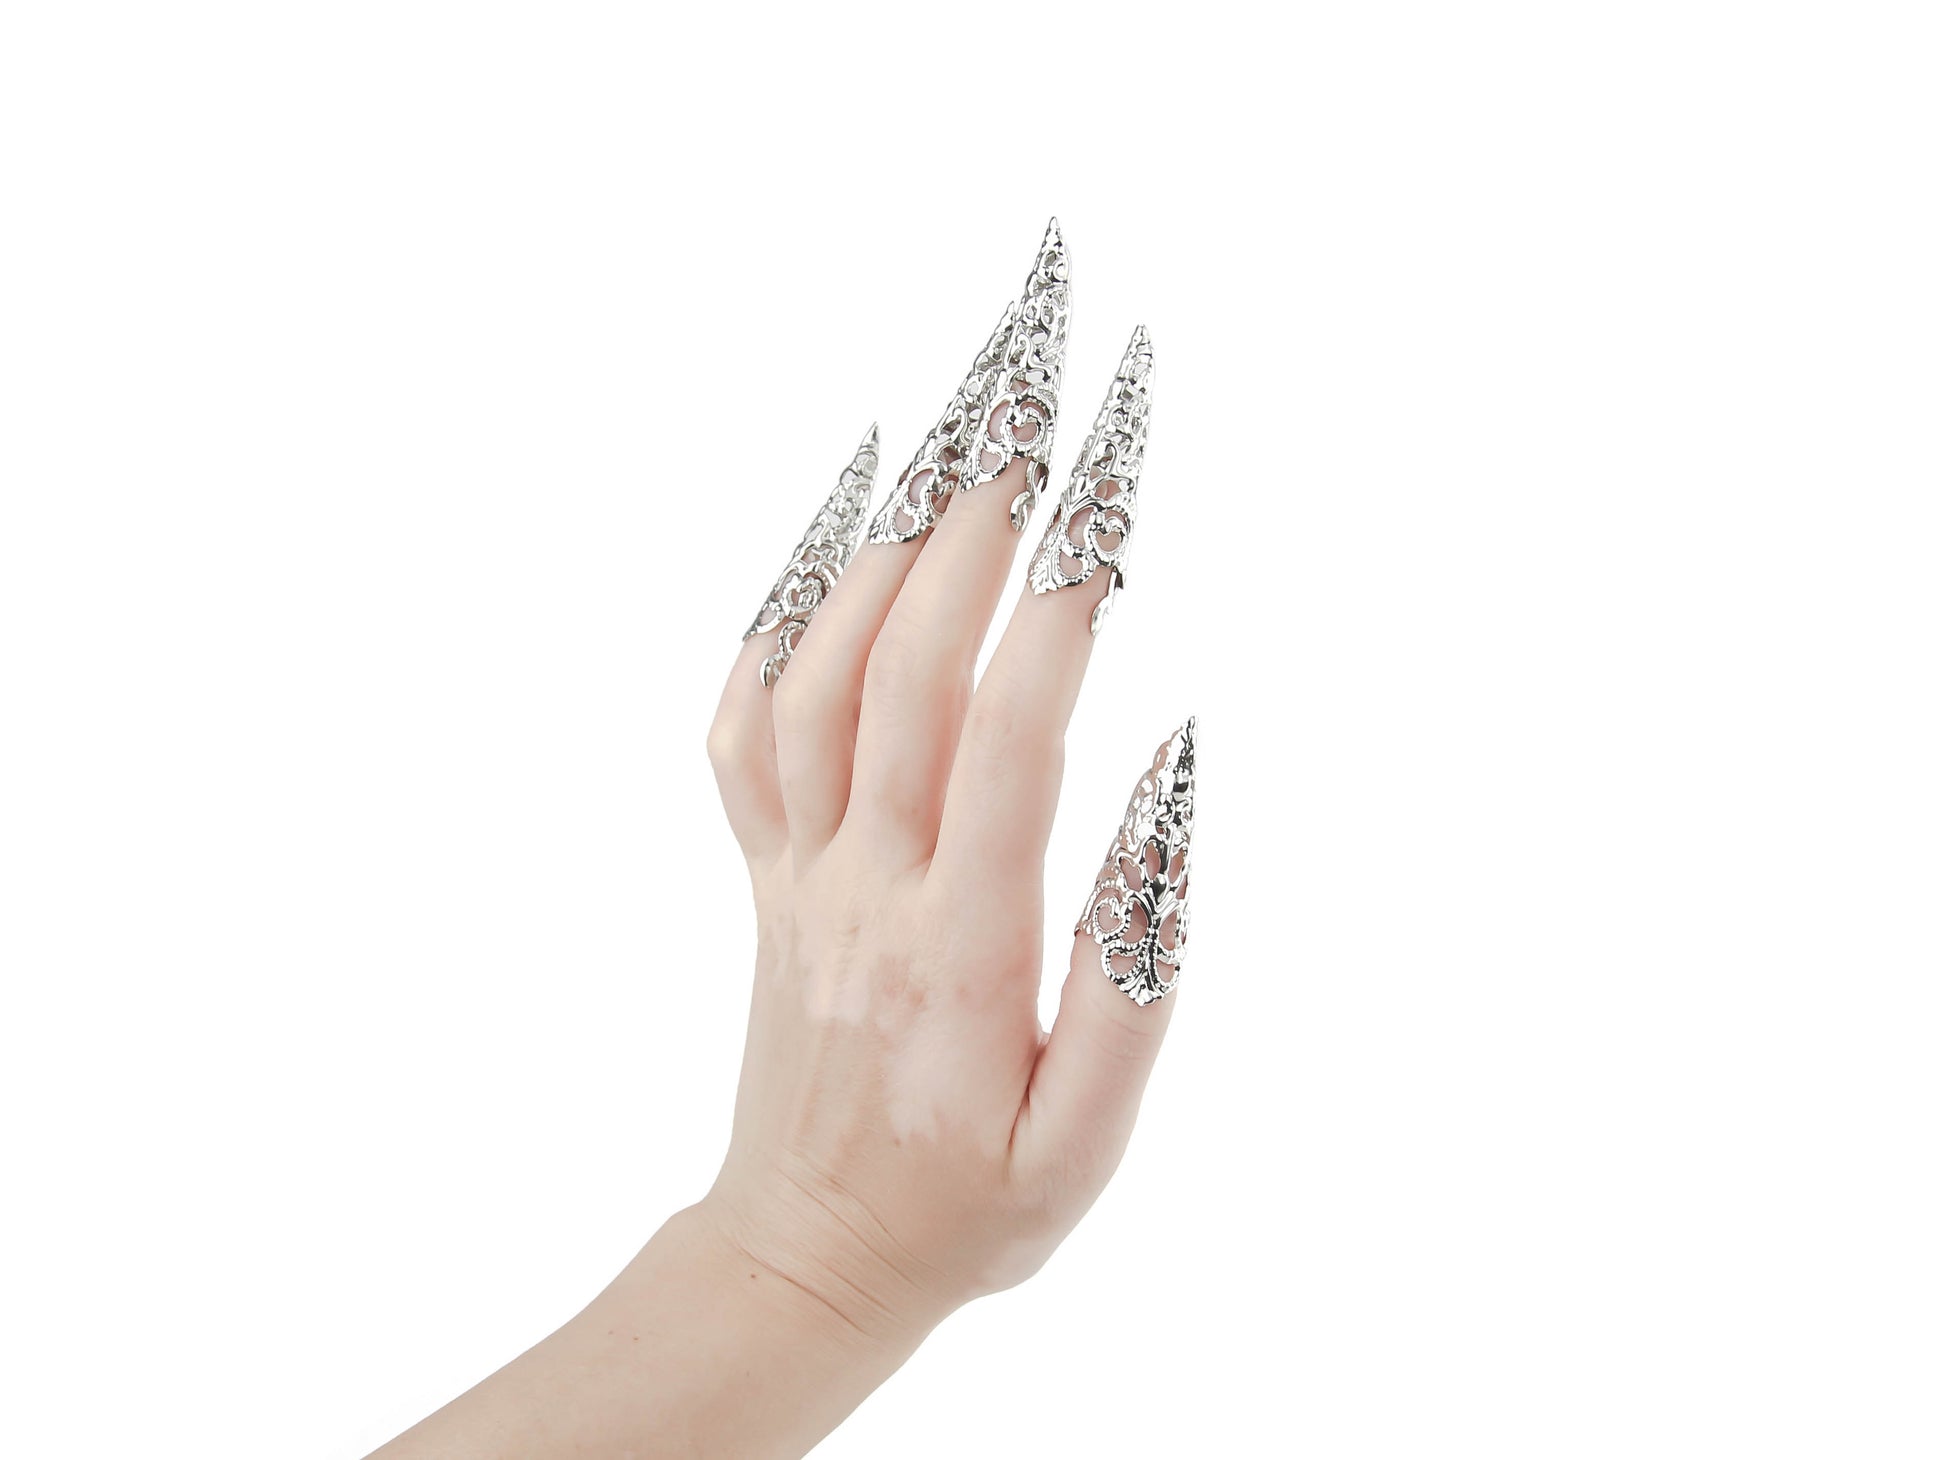 Dramatic long silver finger claws jewelry, capturing Myril Jewels' signature neo-gothic style. These silver filigree claws are perfect for Halloween, complementing gothic-chic and whimsigoth aesthetics. Ideal for avant-garde daily wear or as a statement piece for drag queens and festival attire.